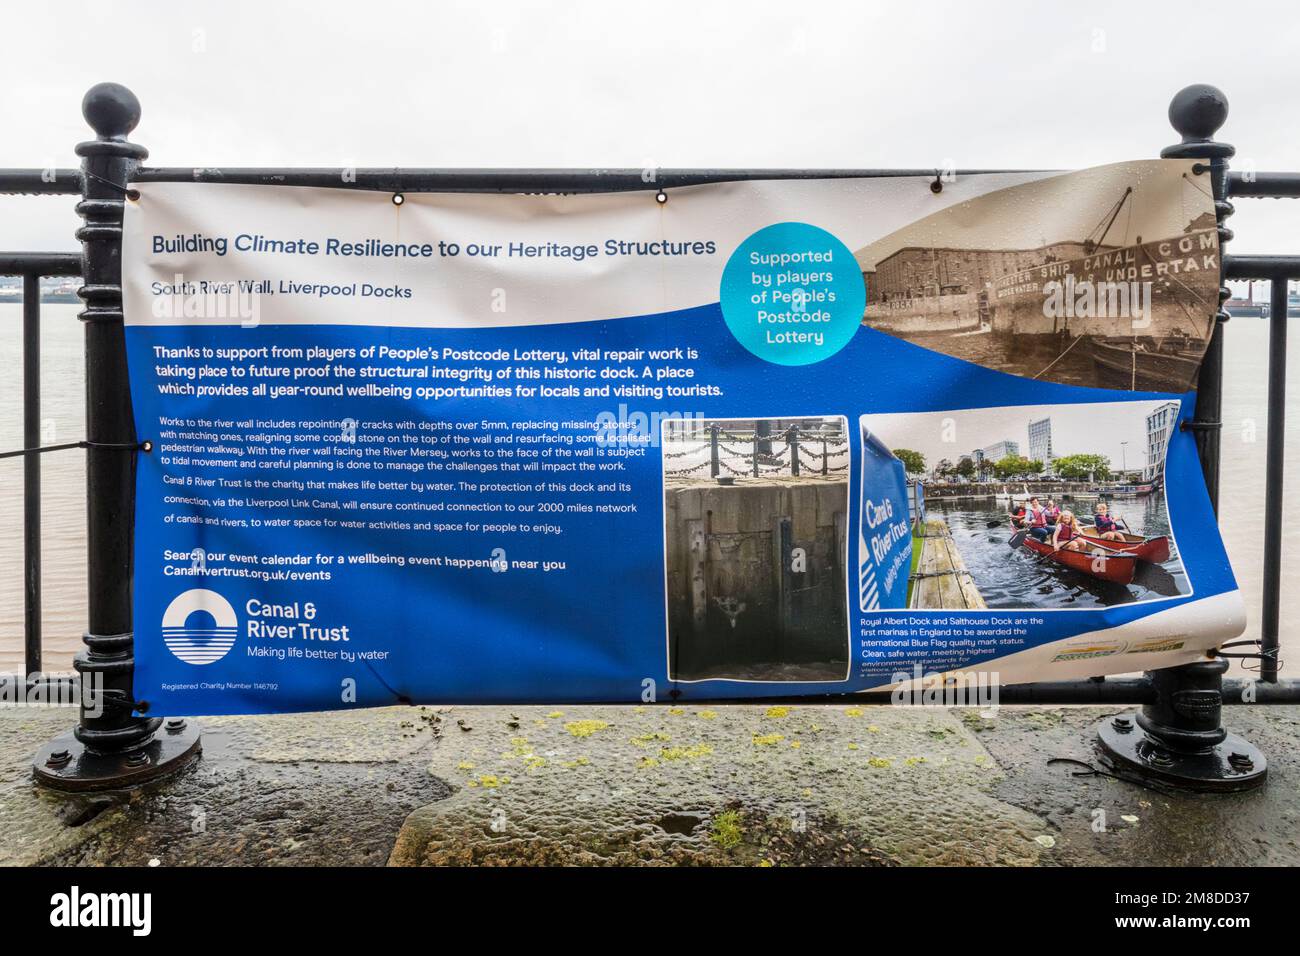 Canal & River Trust sign on Liverpool waterfront explaining work to build climate resilience into dock structure. Stock Photo